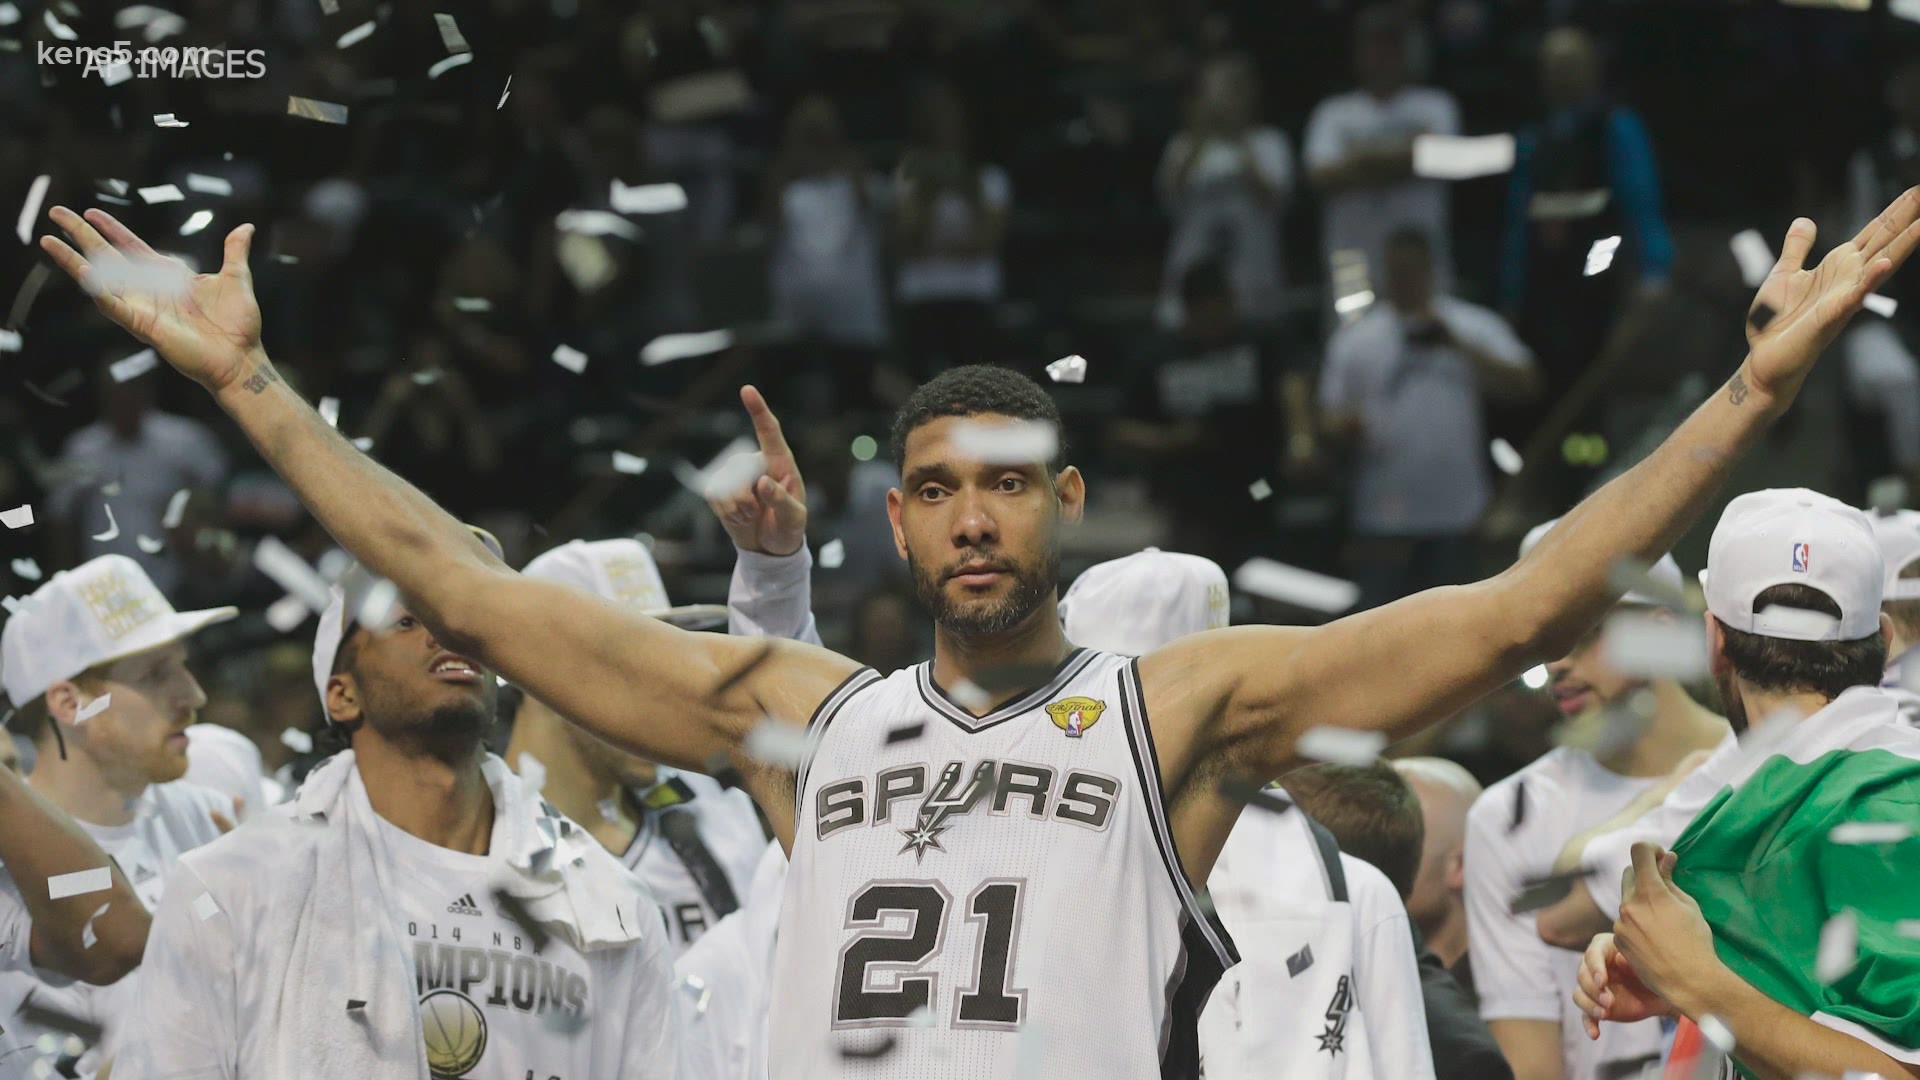 The No. 1 overall pick in 1997 is the greatest power forward in NBA history. Mr. Fundamental grew up in the Virgin Islands, and won five titles in San Antonio.